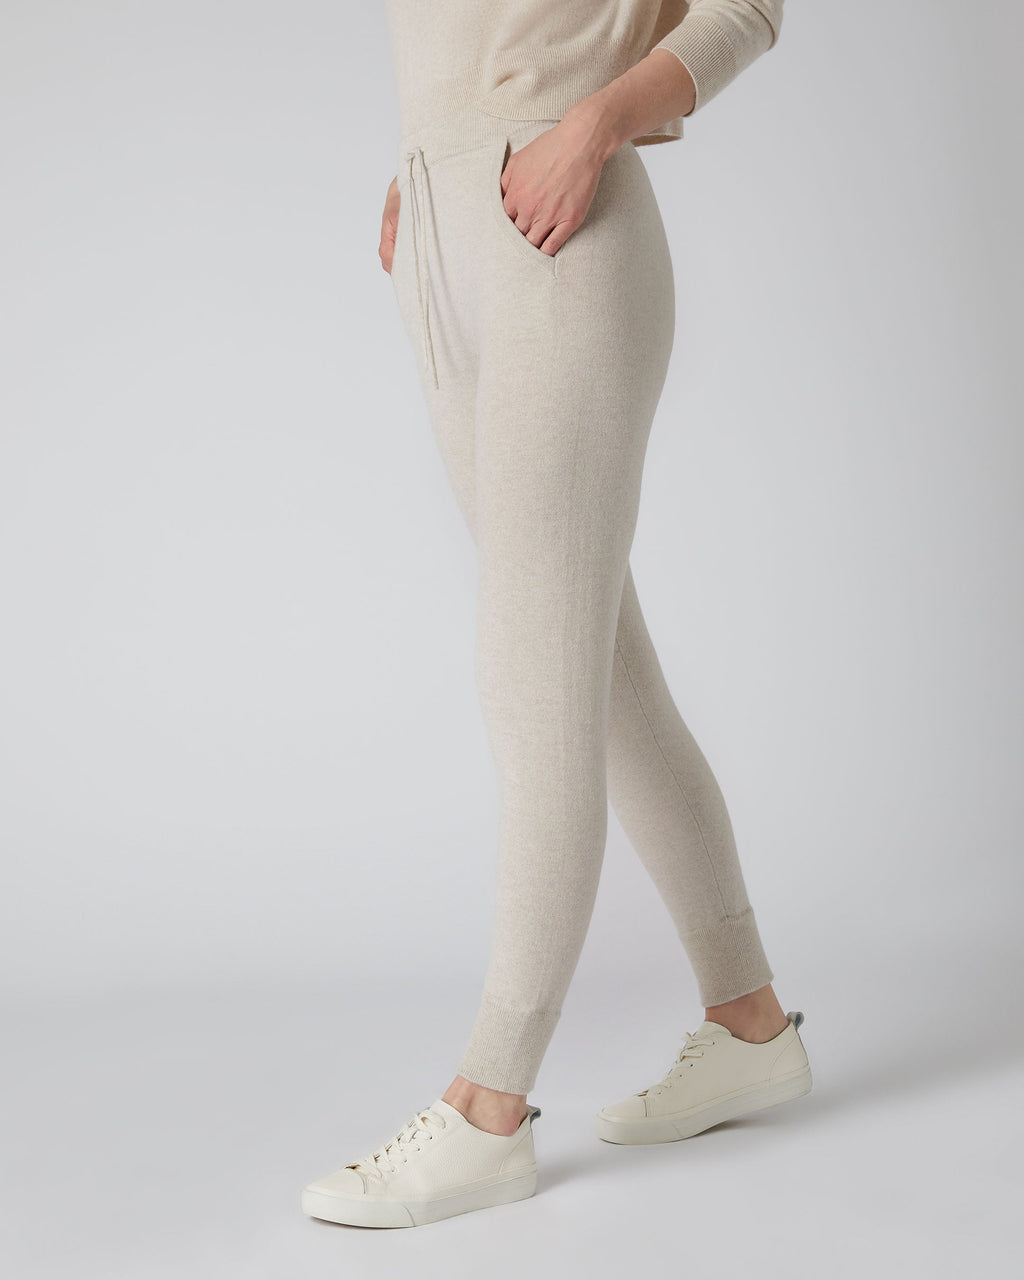 The Cashmere Legging – Ply-Knits